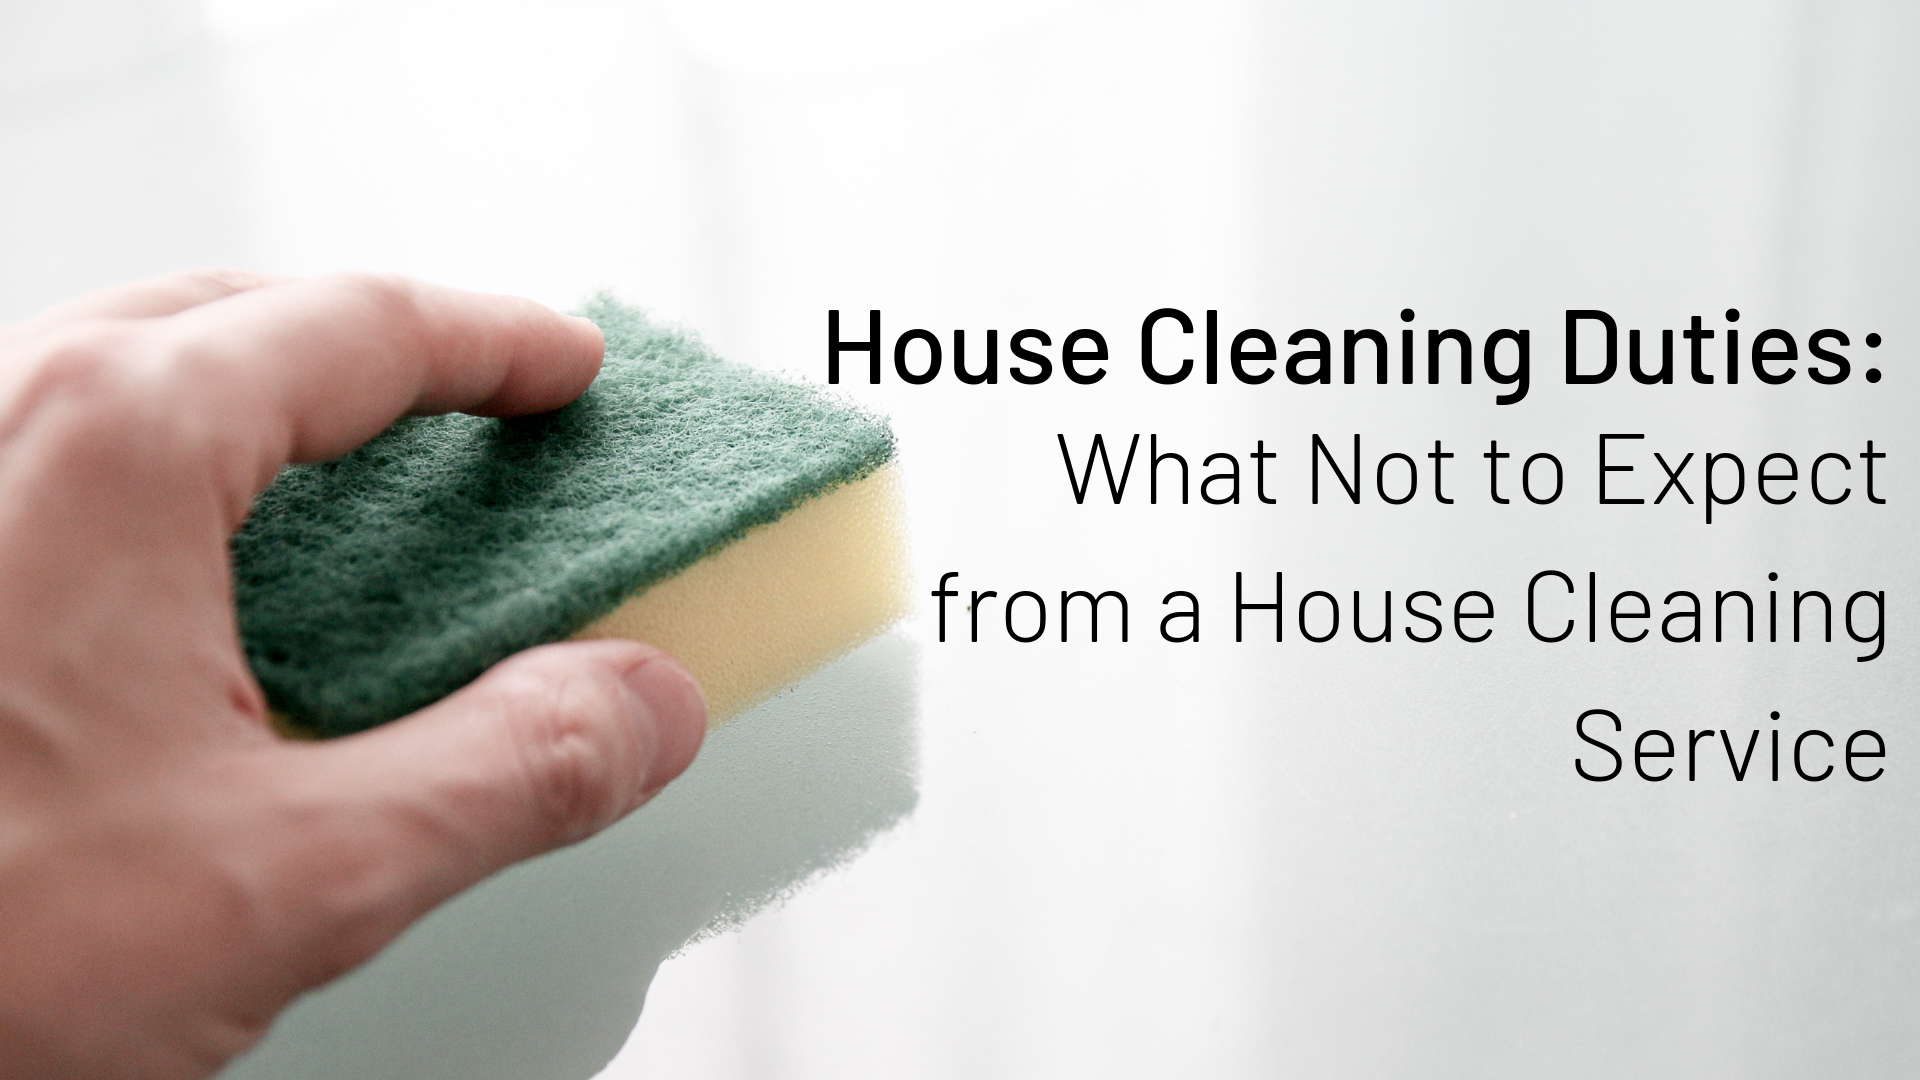 House Cleaning Duties: What Not to Expect from a House Cleaning Service